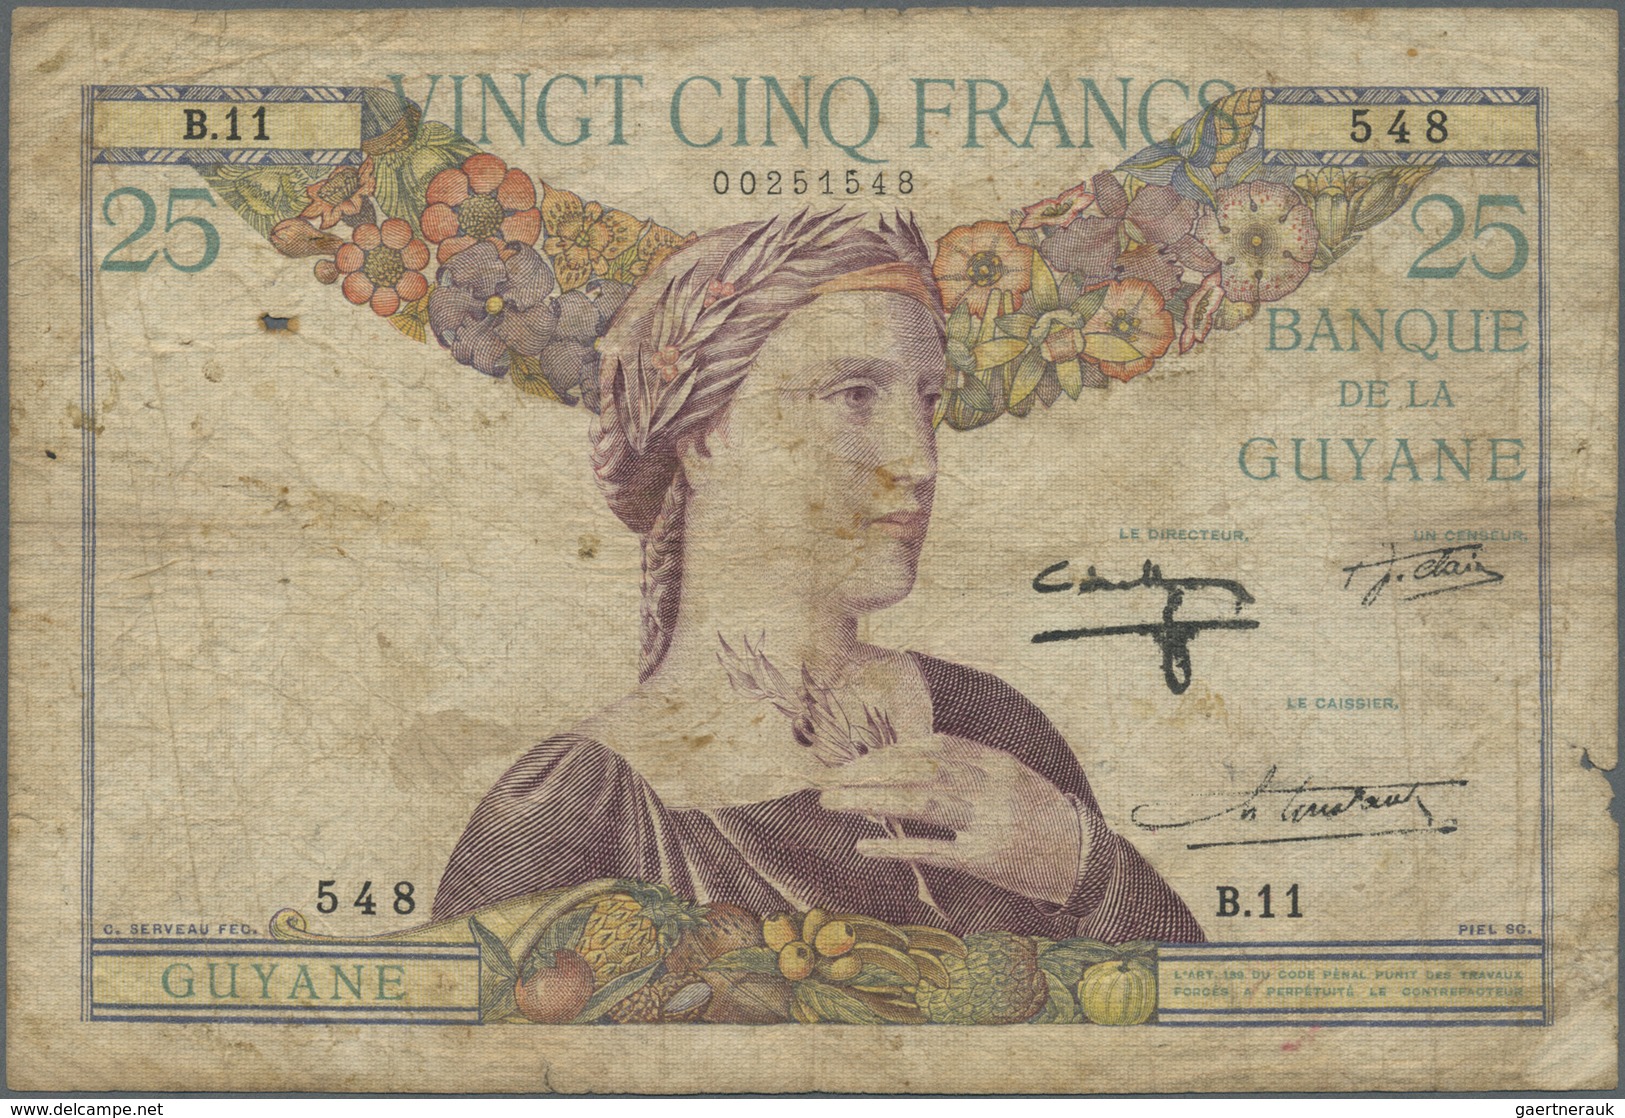 French Guiana / Französisch-Guayana: 25 Francs ND(1933-45) P. 7, Used With Folds, Creases And Stain - Frans-Guyana